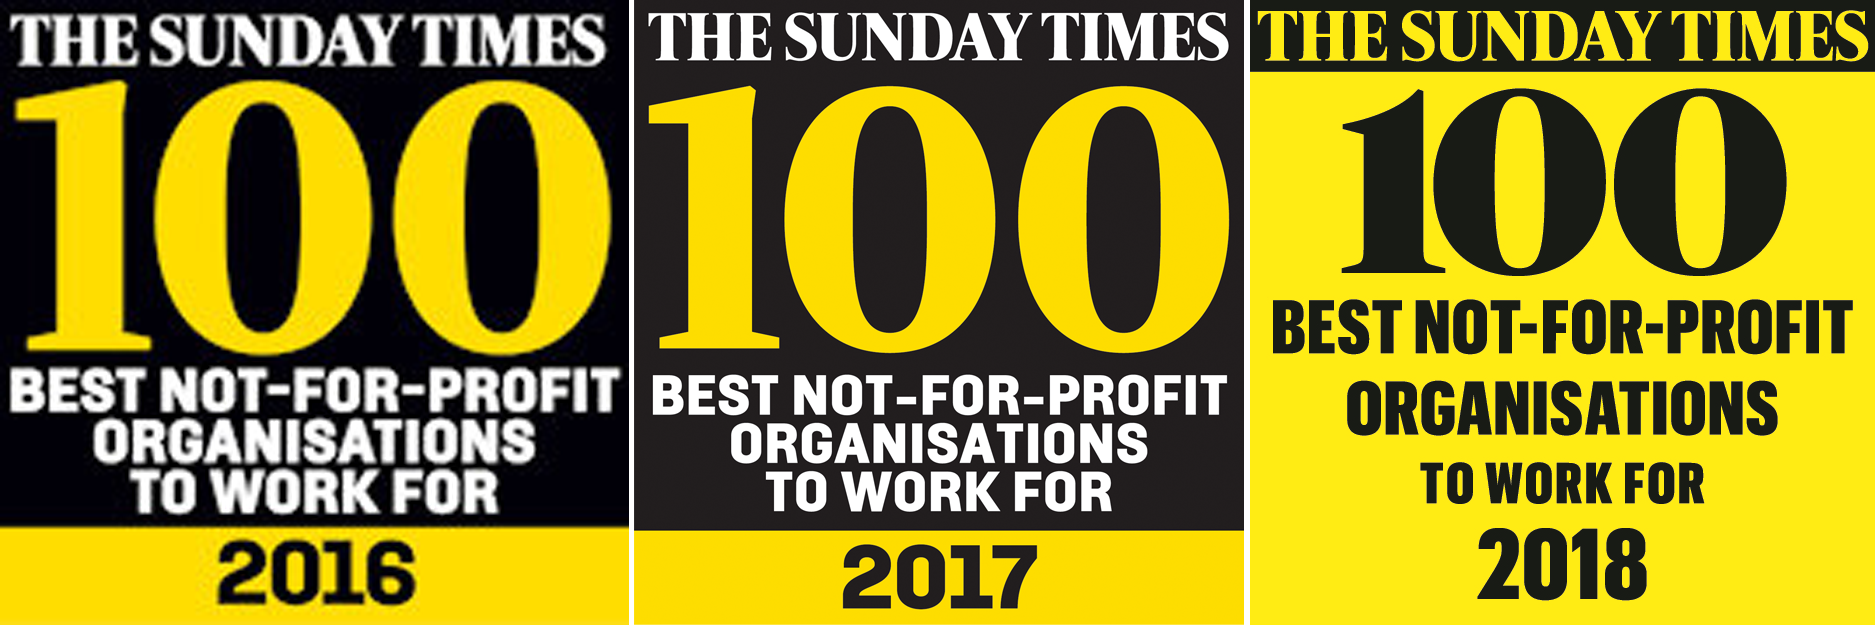 Sunday Times Top 100 Best Not-For-Profit Organisations to Work For Health and Wellbeing Special Award 2016, 2017, and 2018